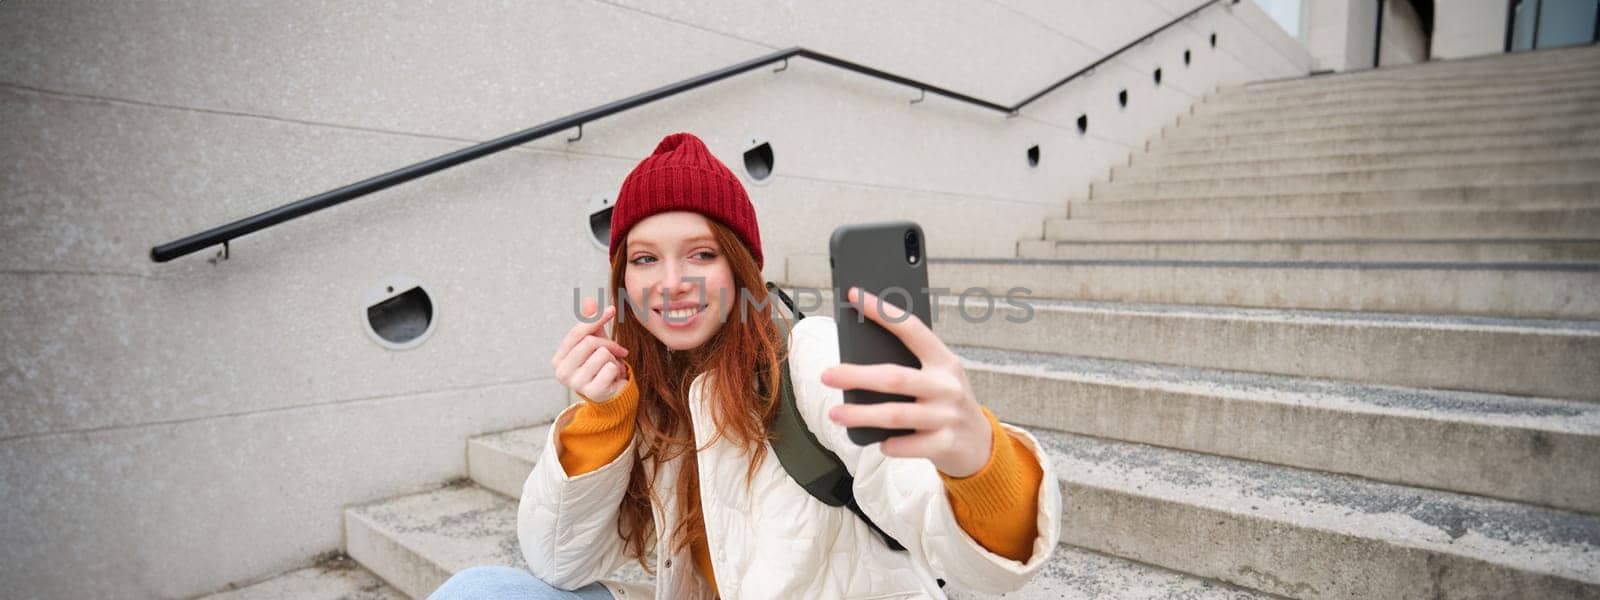 Urban girl takes selfie on street stairs, uses smartphone app to take photo of herself, poses for social media application.